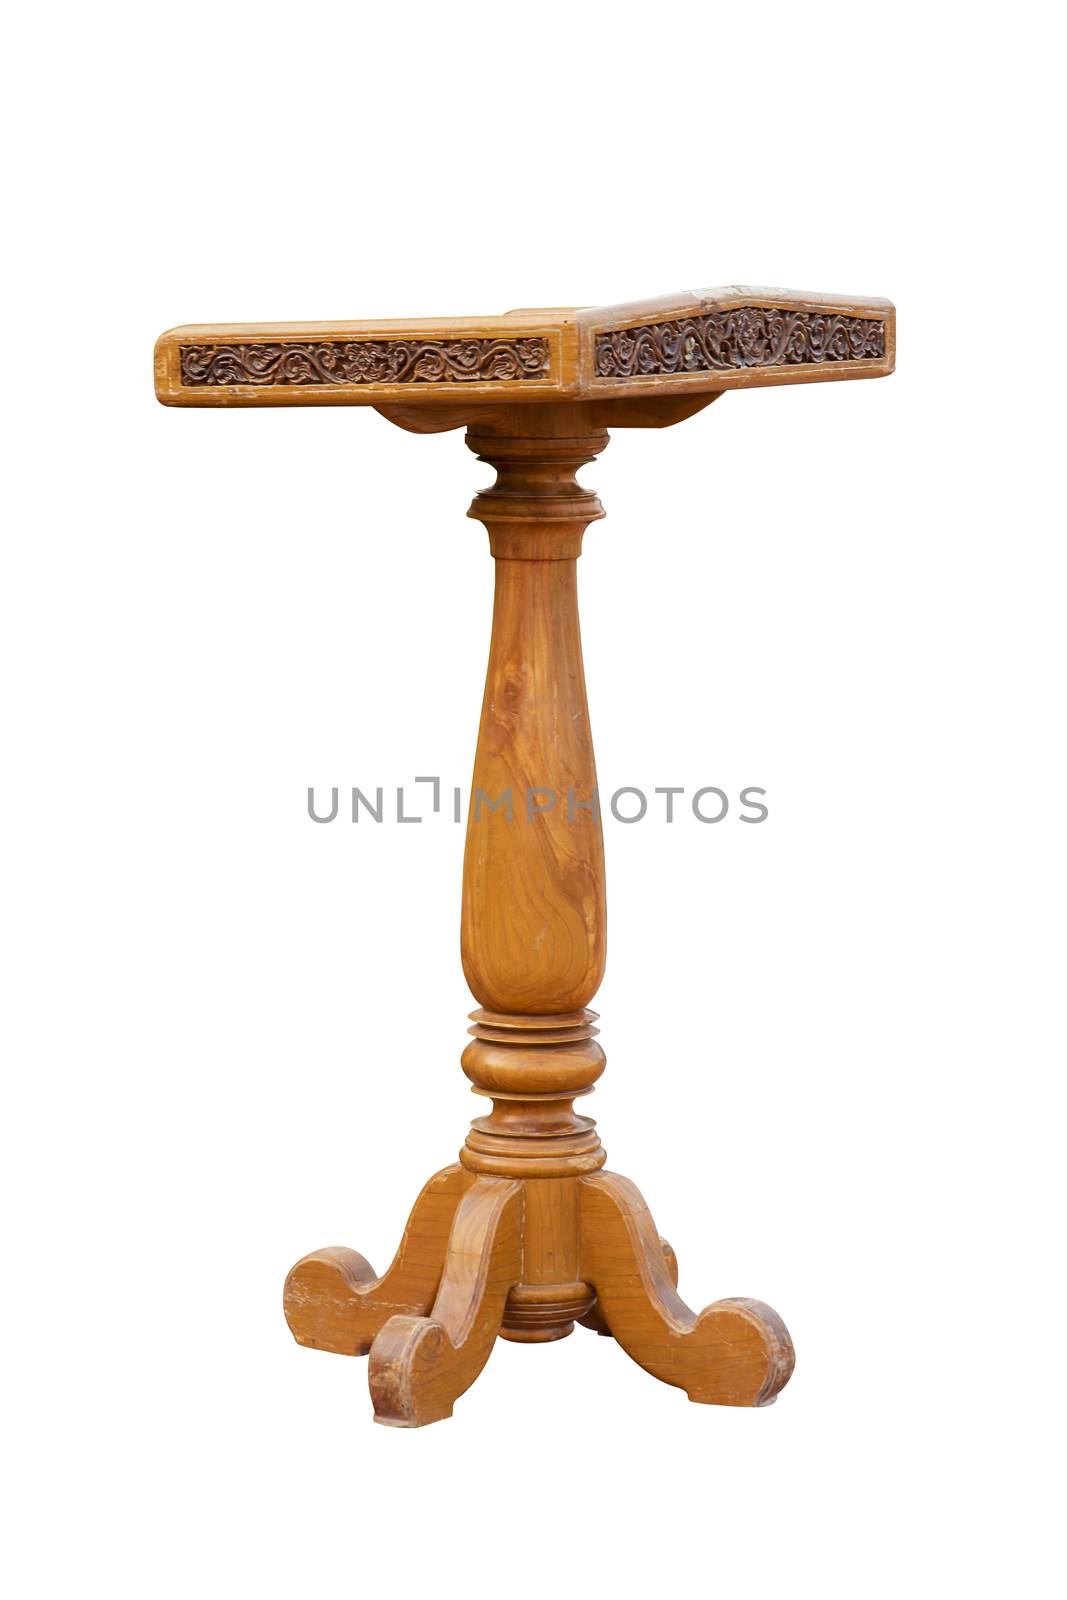 Wooden Podium Tribune Rostrum Stand Isolated. by NuwatPhoto